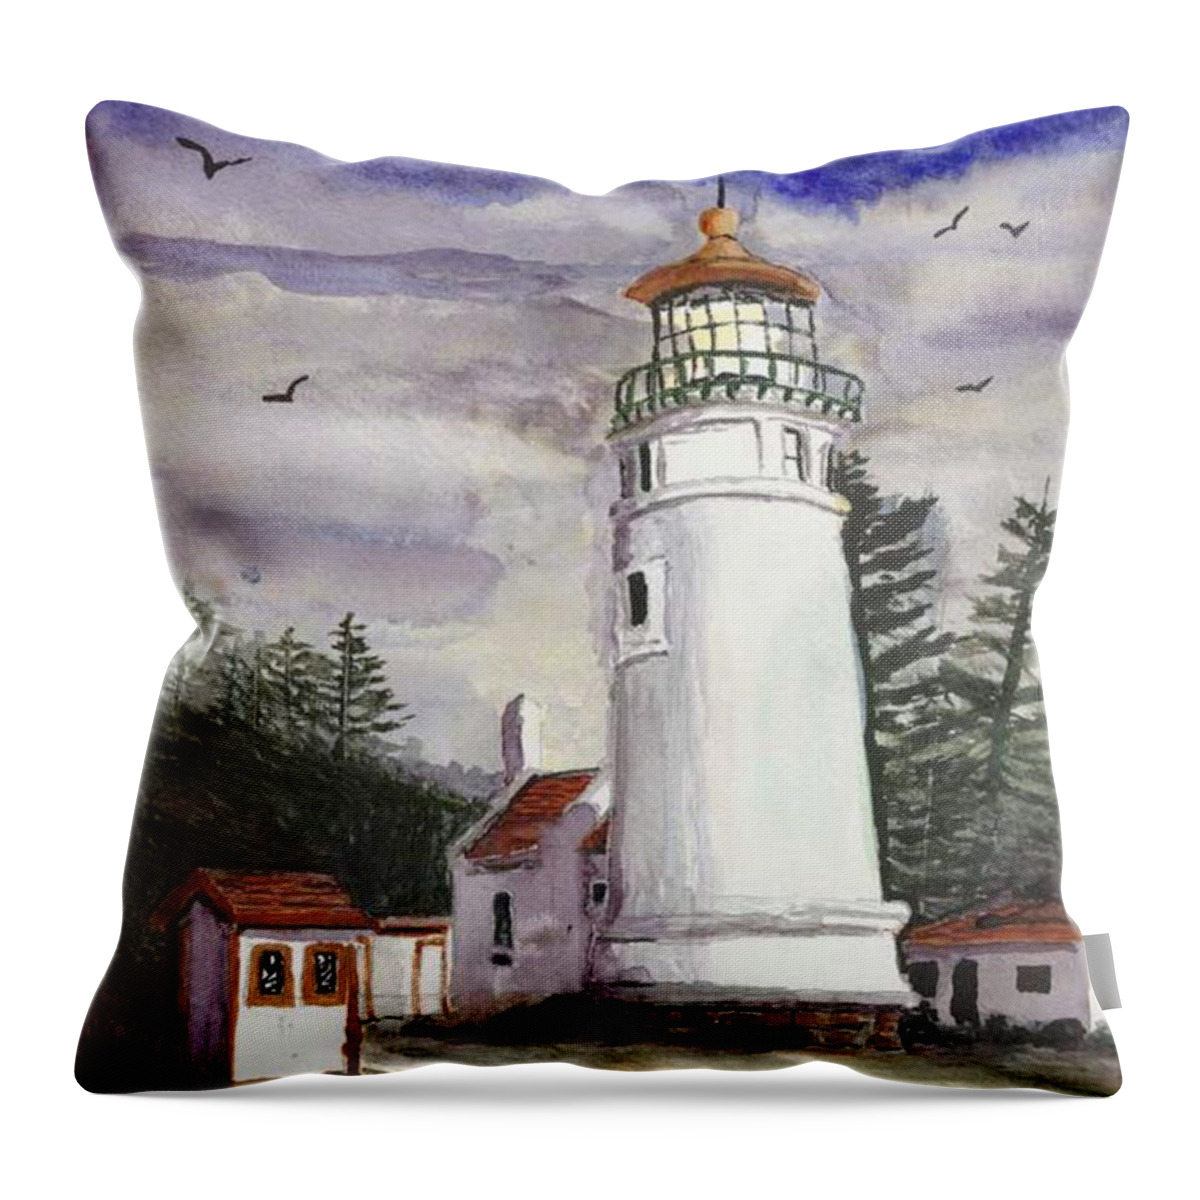 Light House Throw Pillow featuring the painting Umpqua Lighthouse by Chriss Pagani